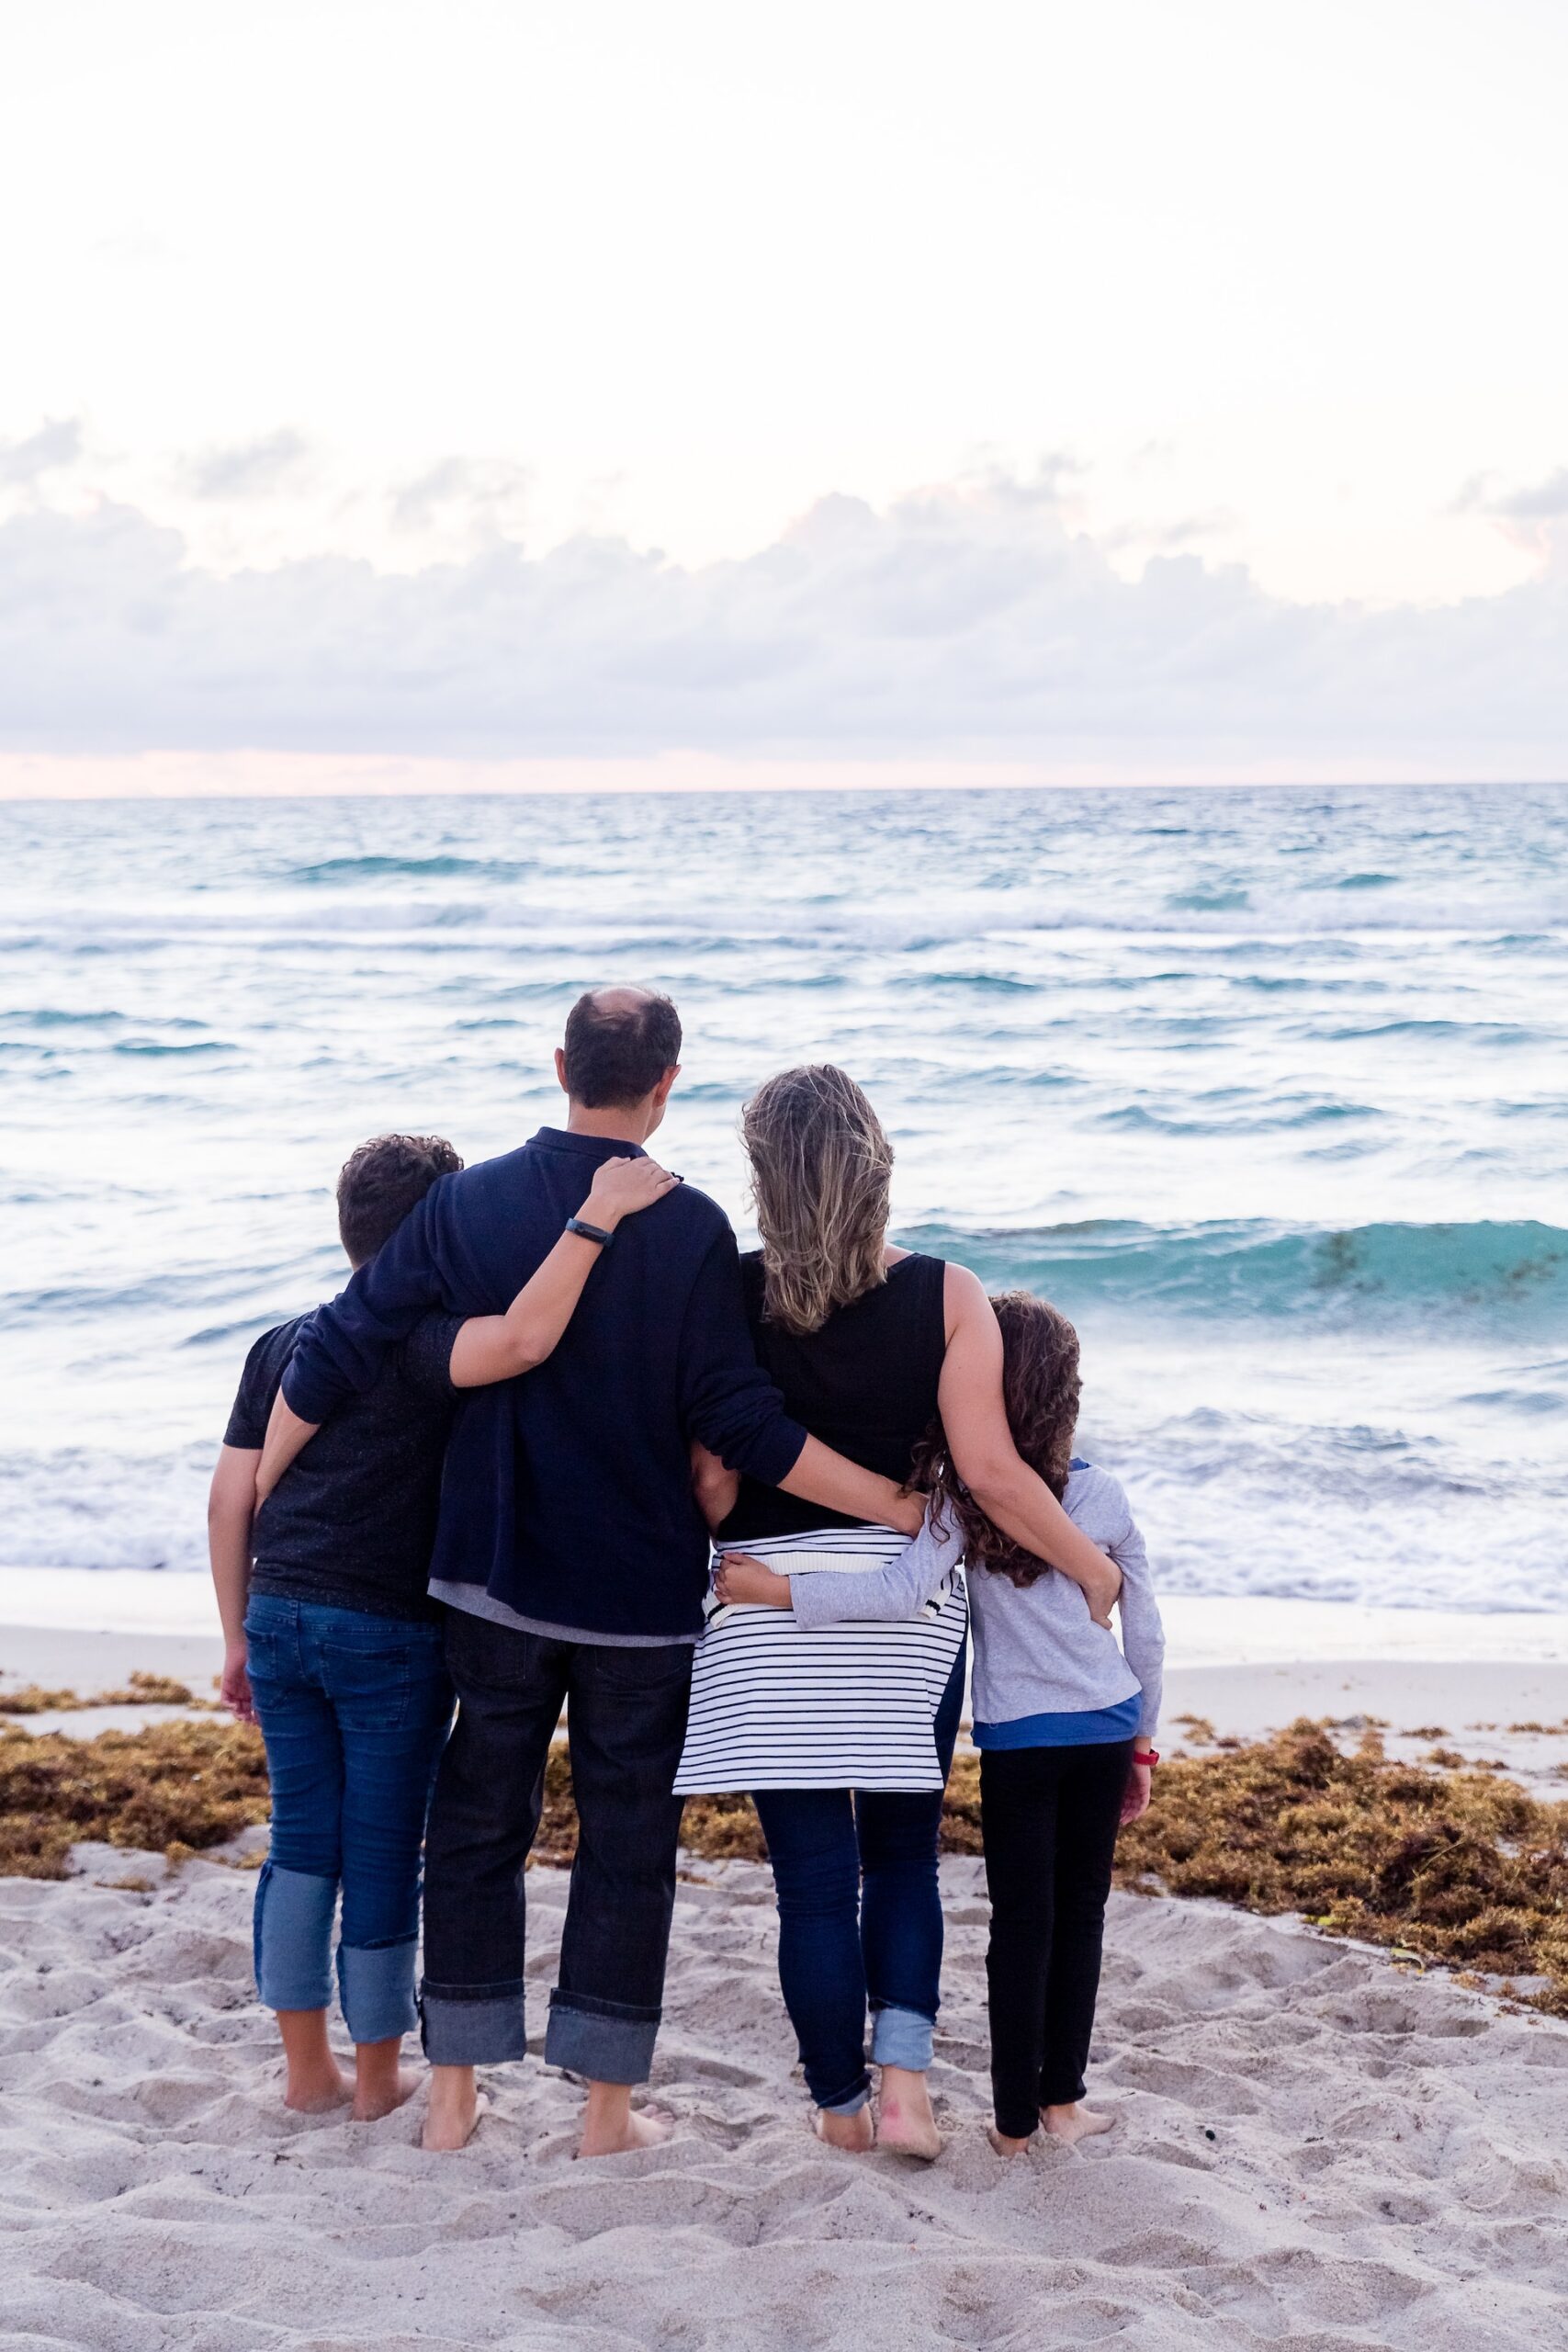 A family standing arm in arm at the seashore.